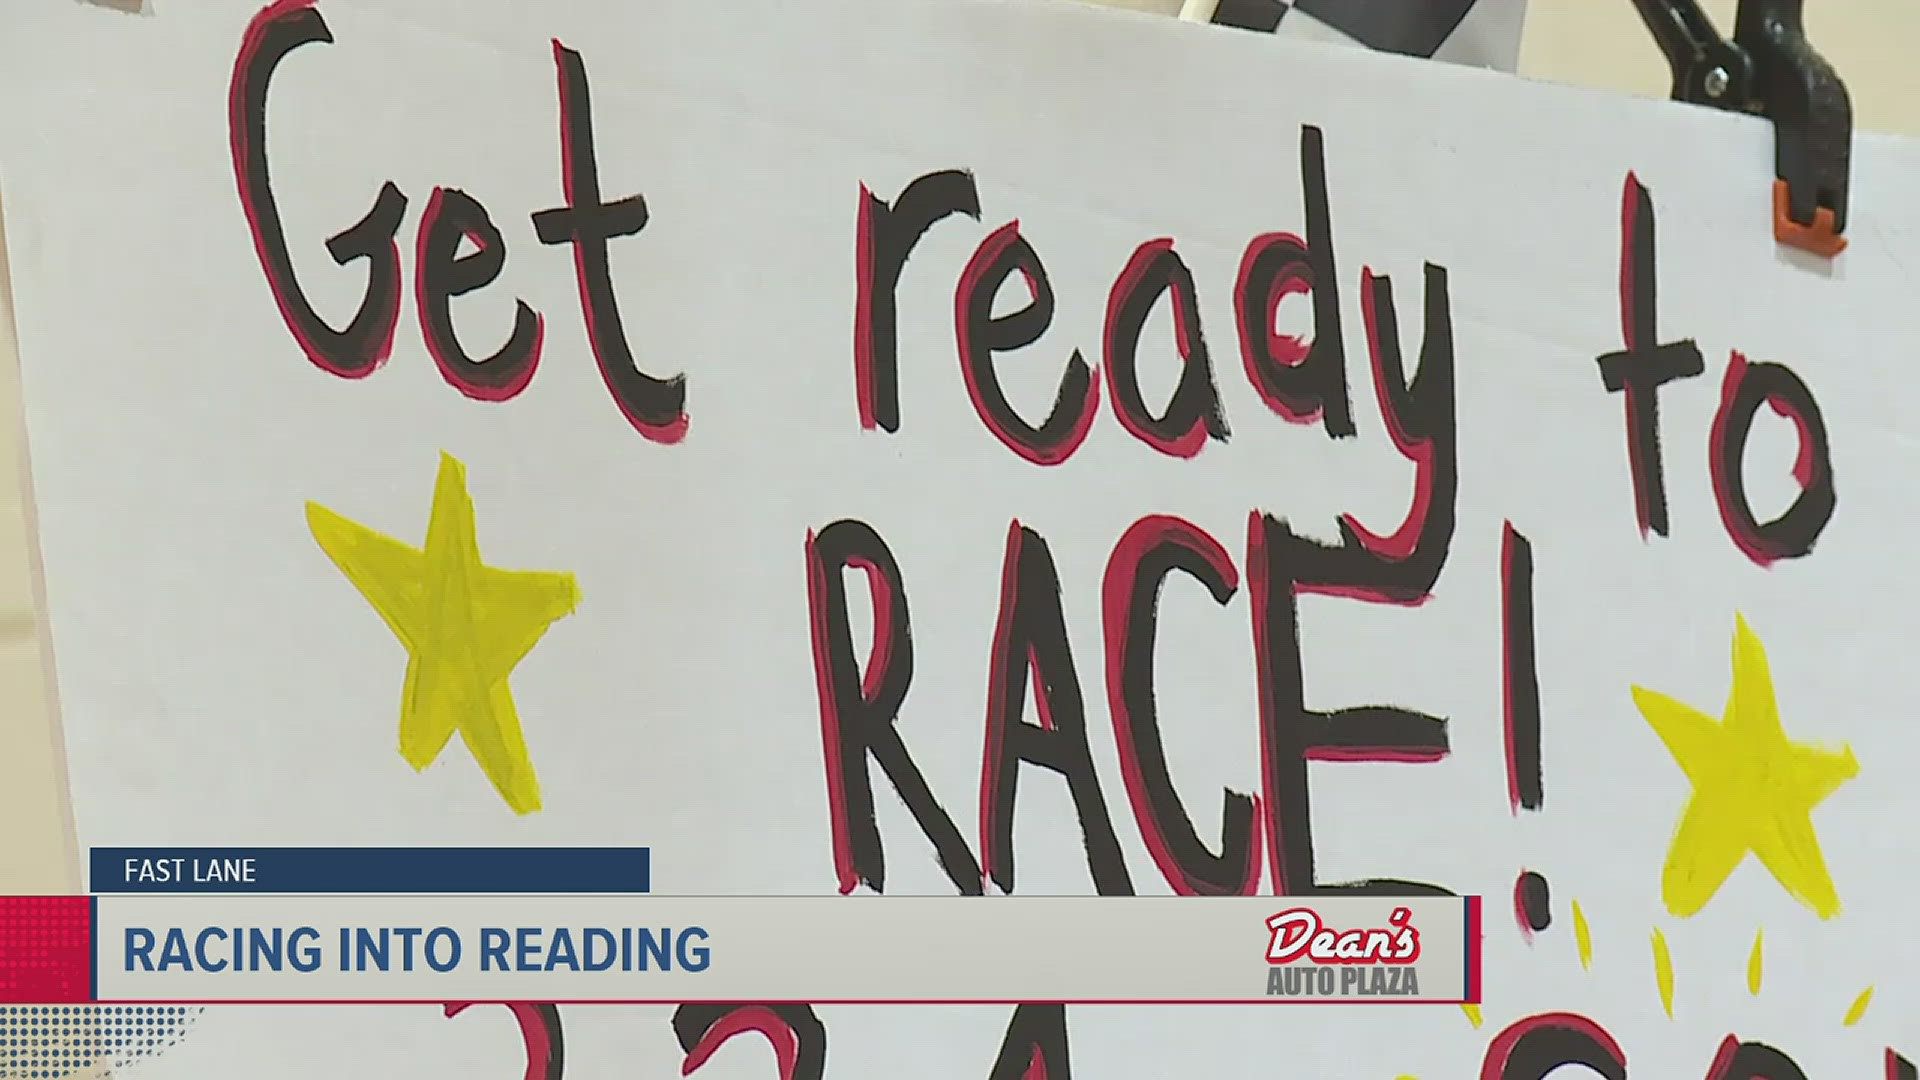 BAPS held a book fair aimed at helping children explore their interests, and Lucas Wolfe won his first race in nearly two years.